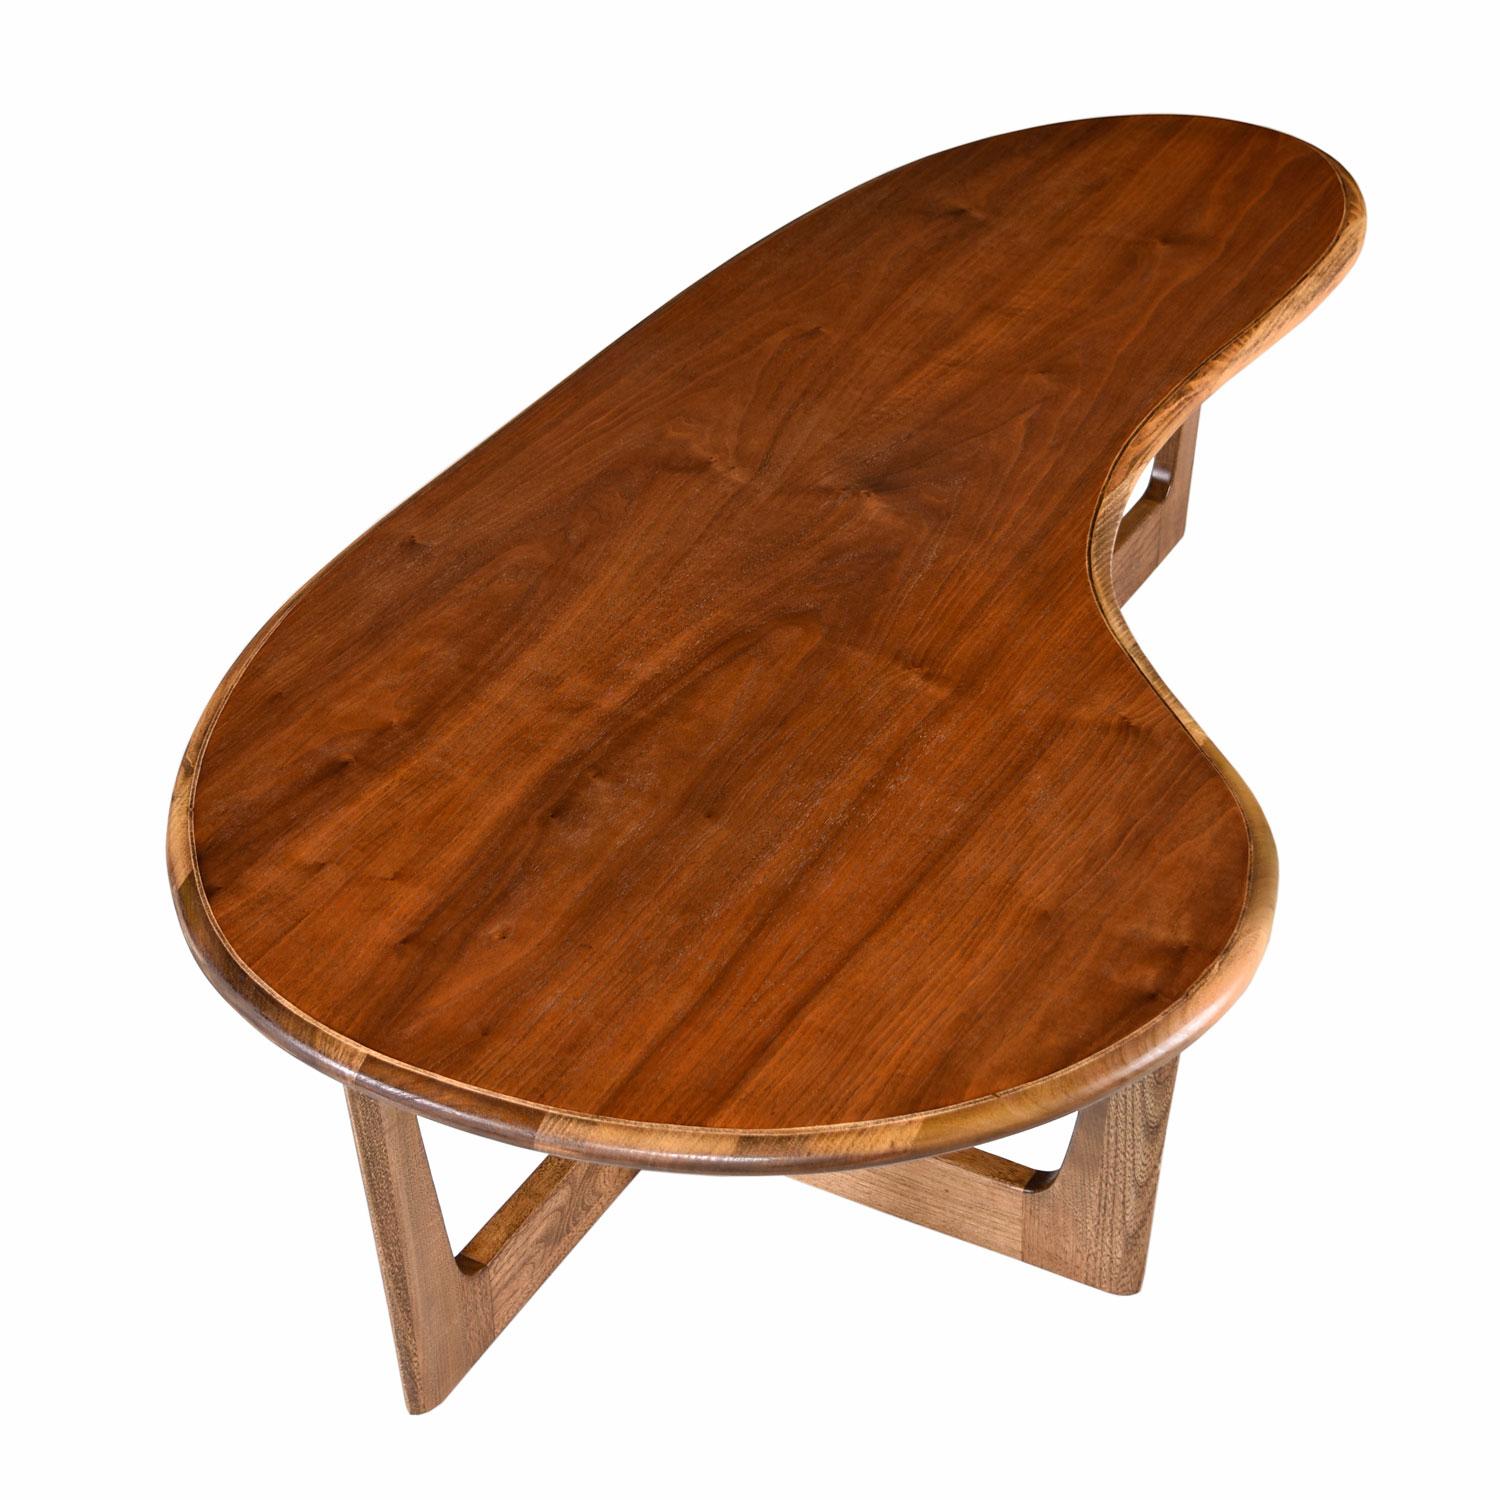 This Mid-Century Modern amoeba coffee table exhibits amorphic design reminiscent of works by Adrian Pearsall. The cross beam trestle style solid oakwood base perfectly balances the boomerang shaped top. This piece is all solid oak with a stunning,